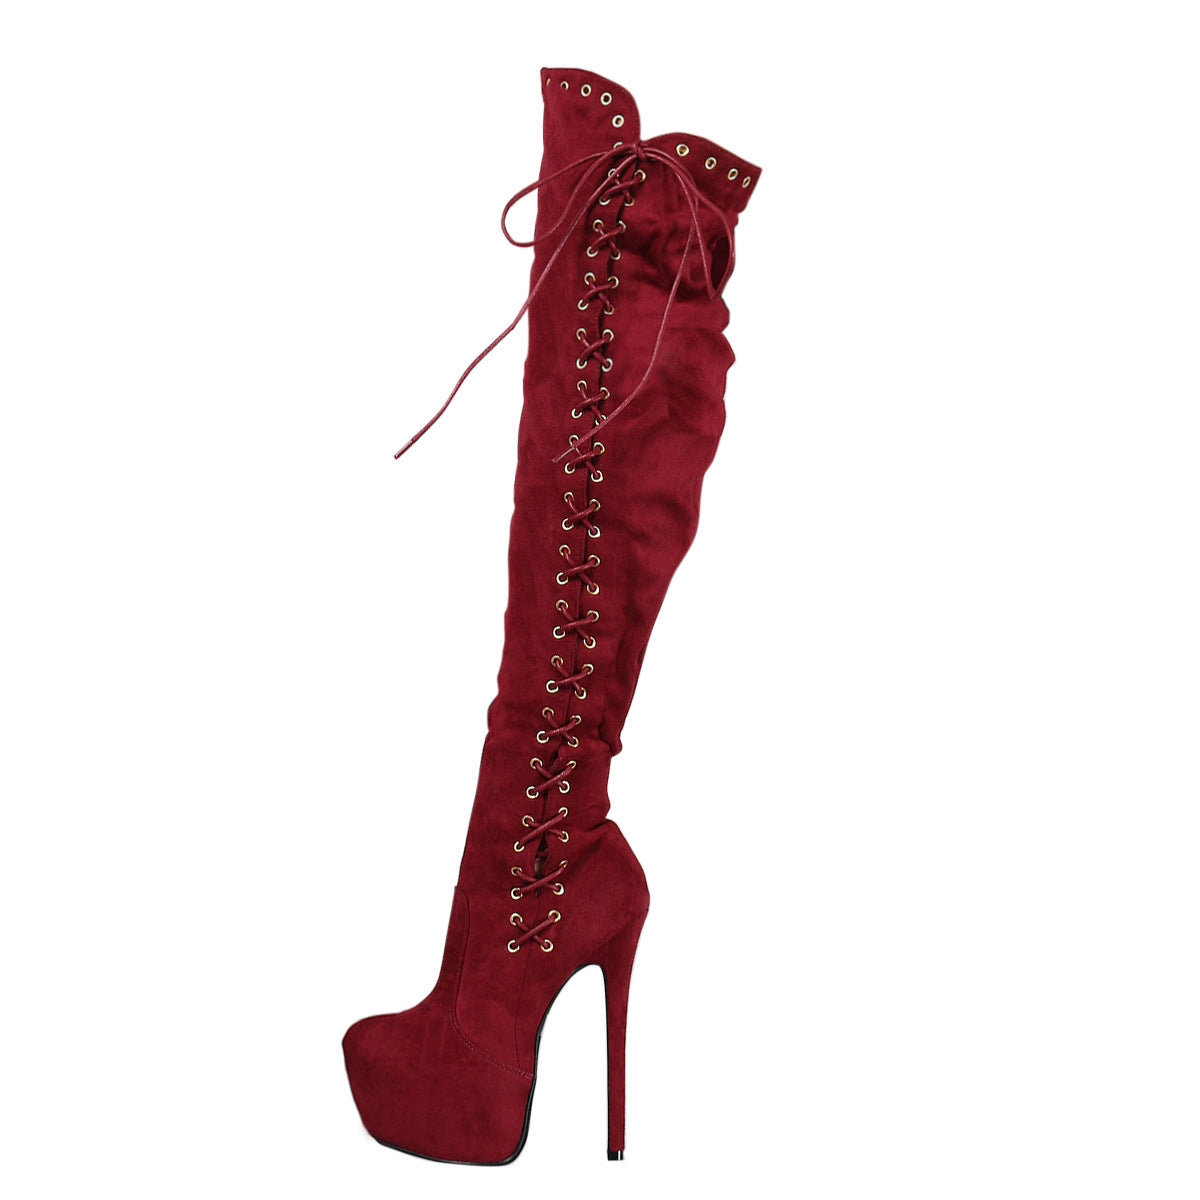 Lace UP Platform Round Toe Super High Stiletto Heel Over the Knee Boots